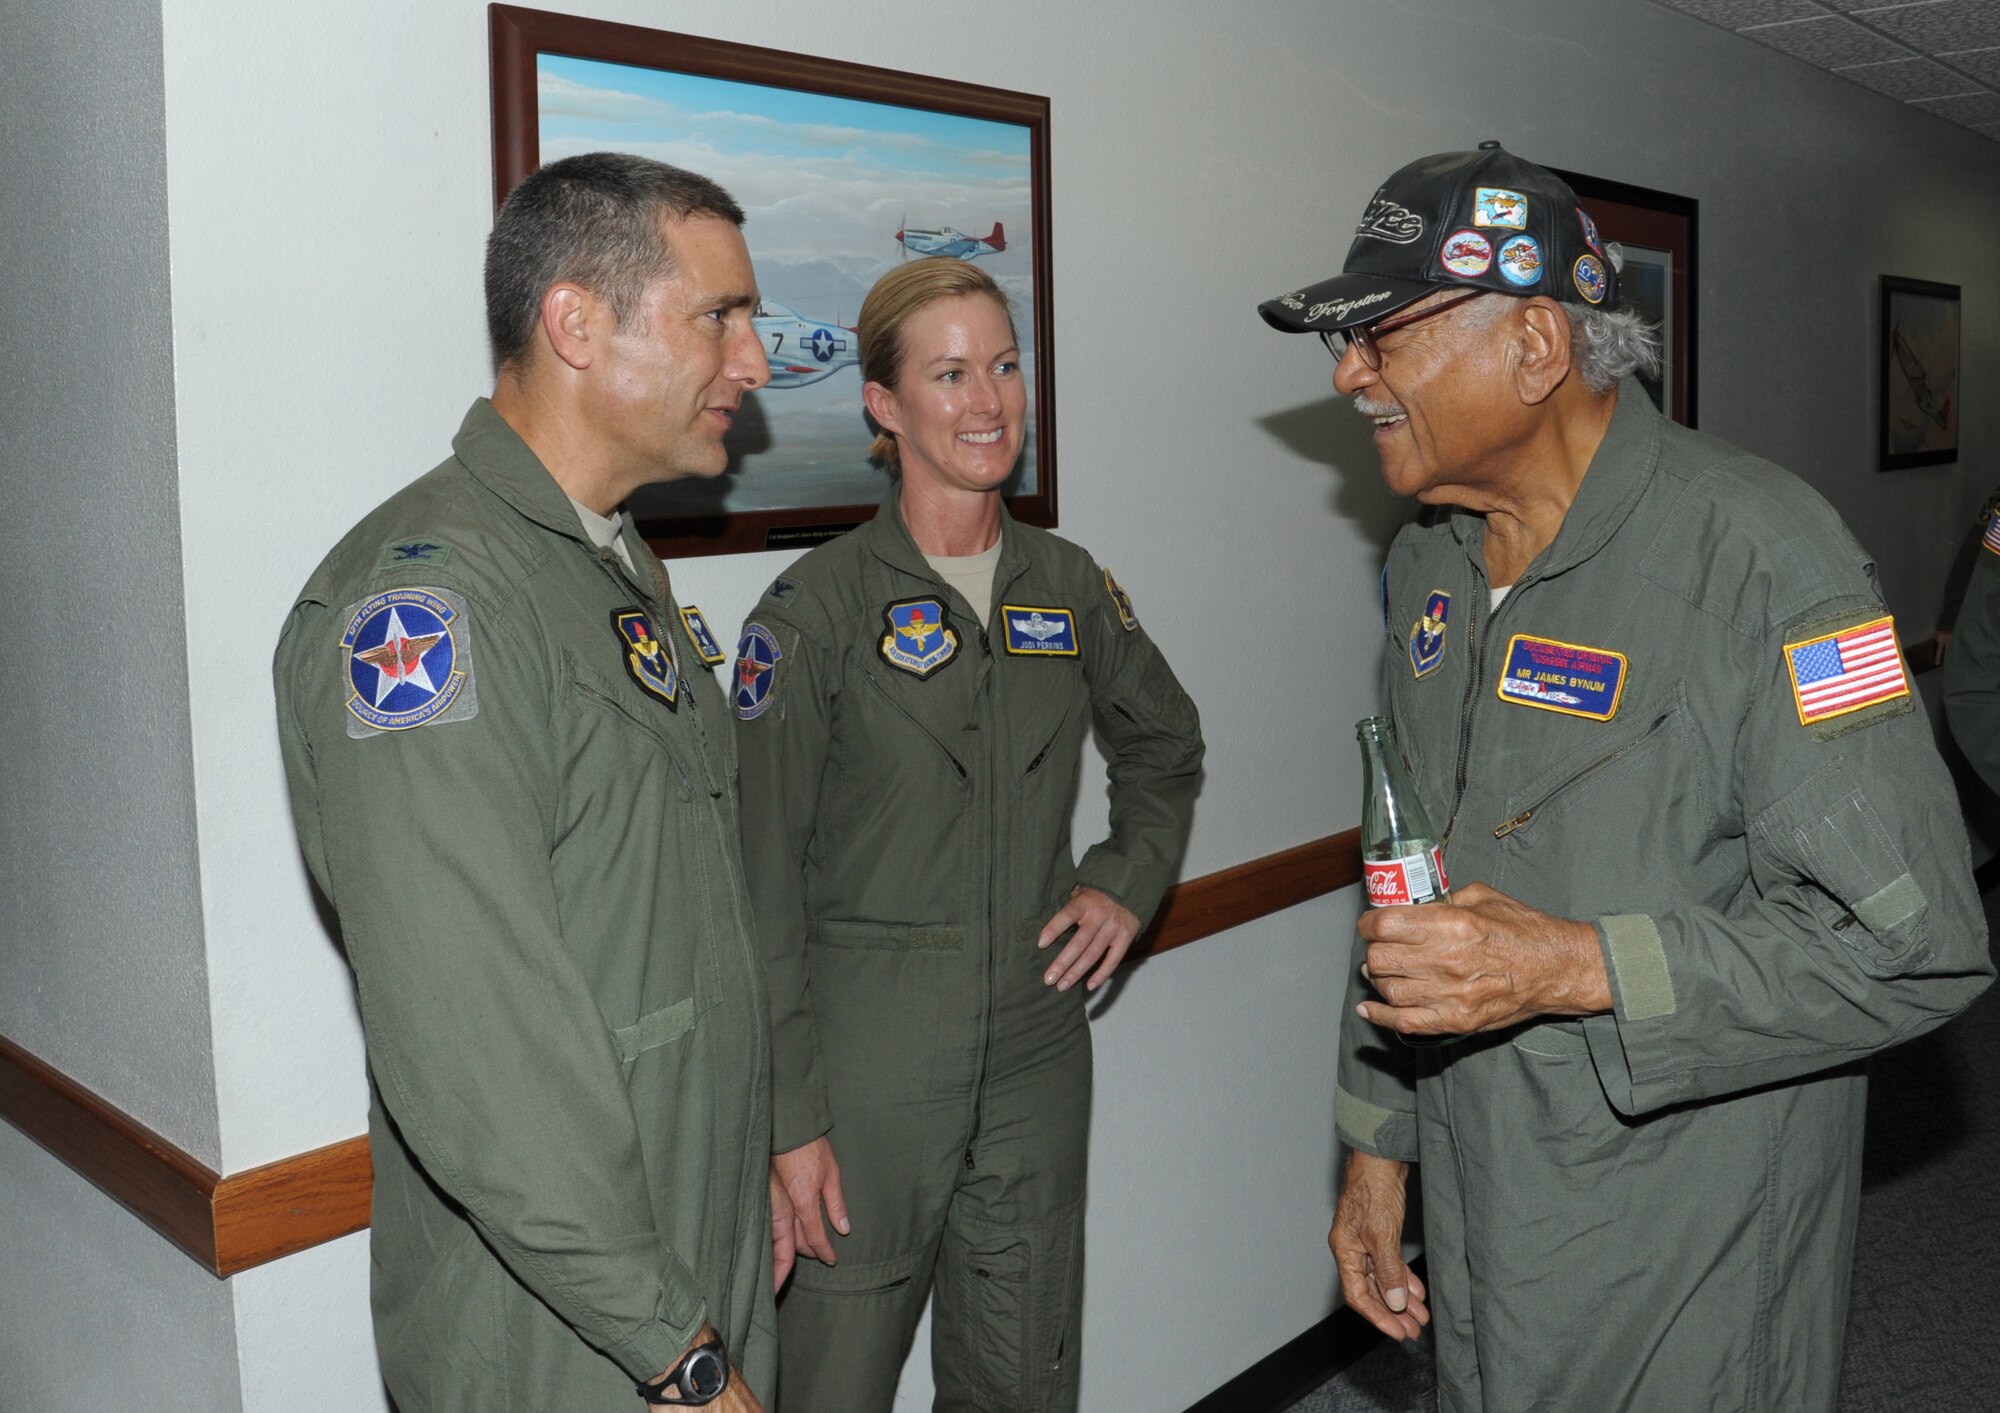 Col. Matthew Isler, left, 12th Flying Training Wing commander and Col. Jodi Perkins, 12th Flying Training Wing vice commander speak to James Bynum, Tuskegee Airman, during the Tuskegee Airmen Tribute 2015, June 11, at Joint Base San Antonio-Randolph, Texas. The Tuskegee Airmen were the first African-American military aviators in the United States Armed Forcesbeginning in World War II. (U.S. Air Force photo by Joel Martinez)